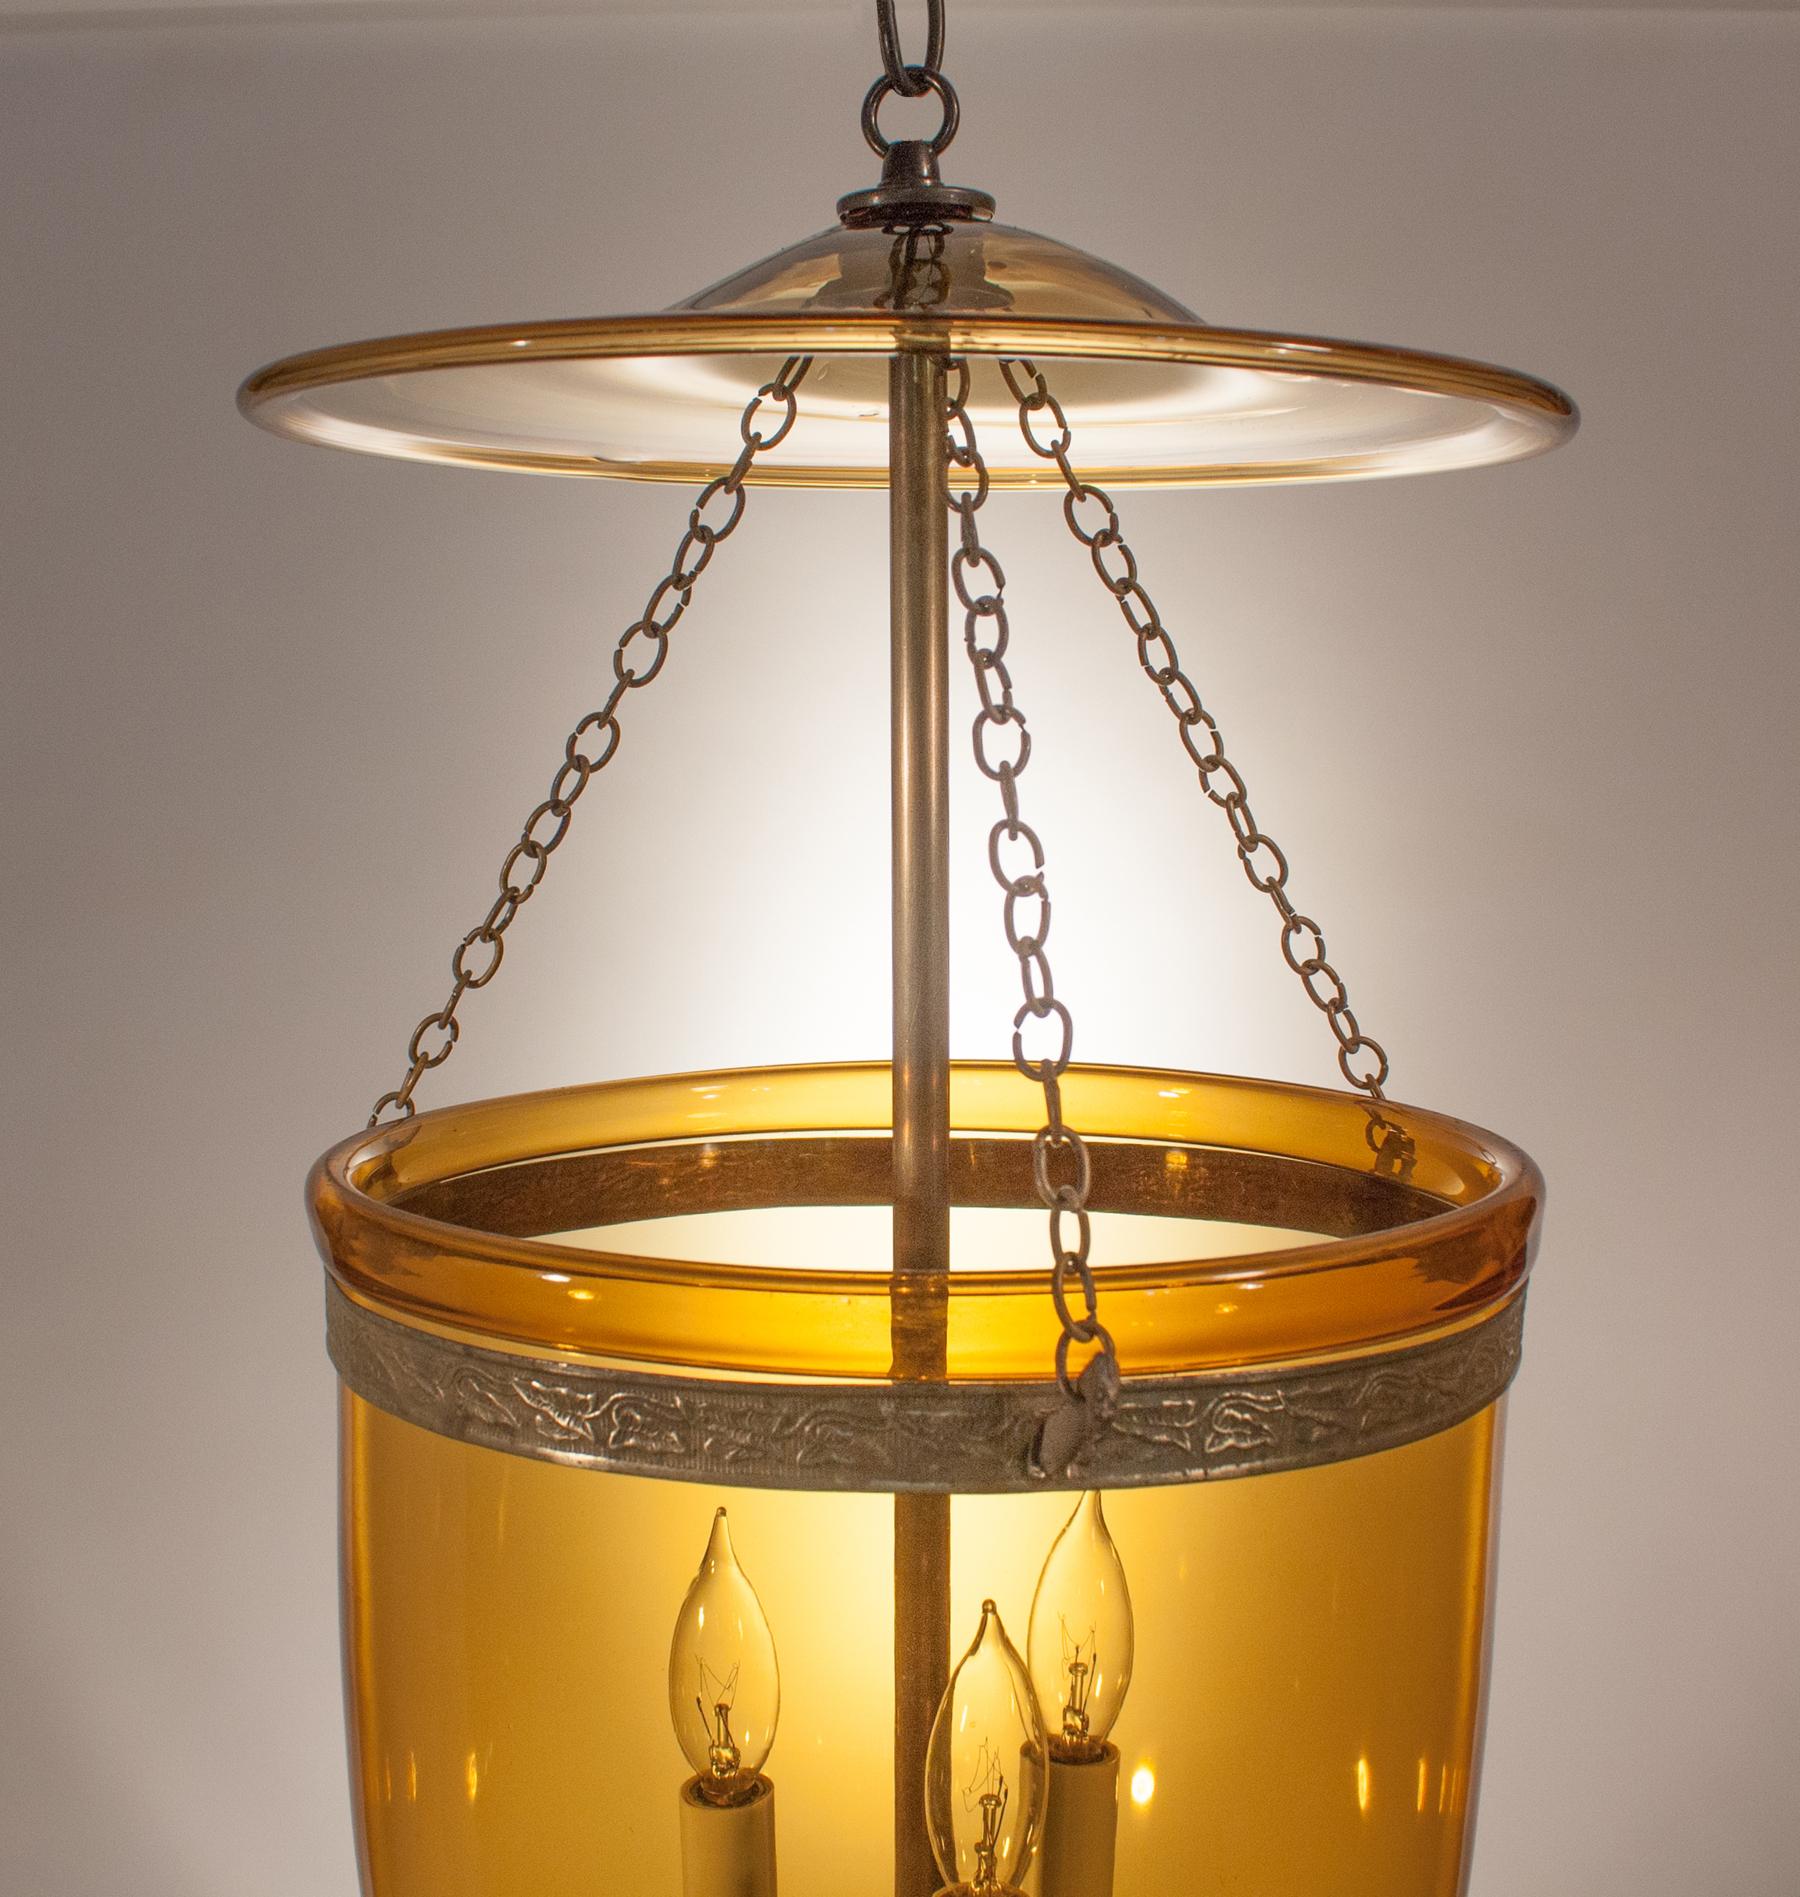 Unknown Antique Bell Jar Lantern with Amber Colored Glass